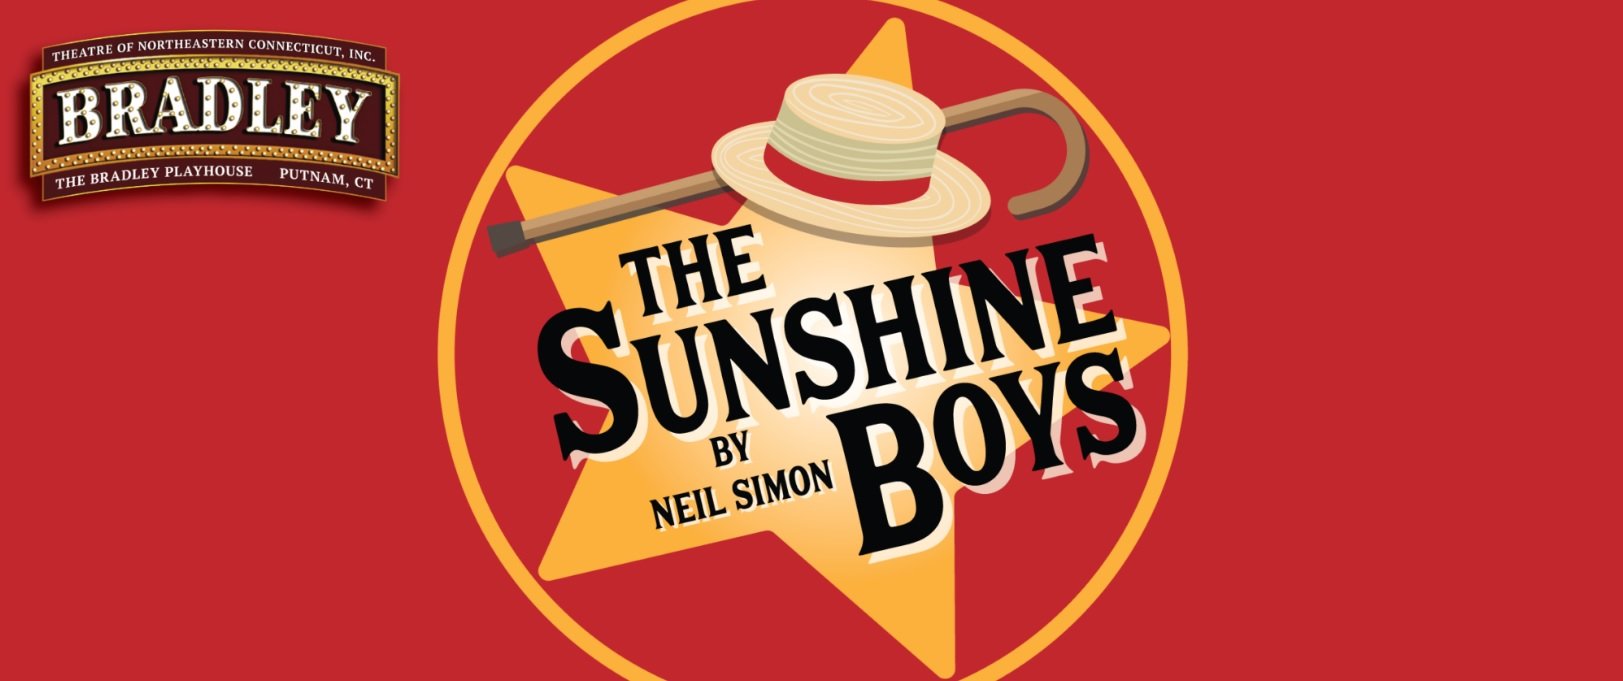 "The Sunshine Boys" - by Neil Simon - Theatre Of Northeastern Connecticut, Inc. at the Bradley Playhouse (Putnam, CT)